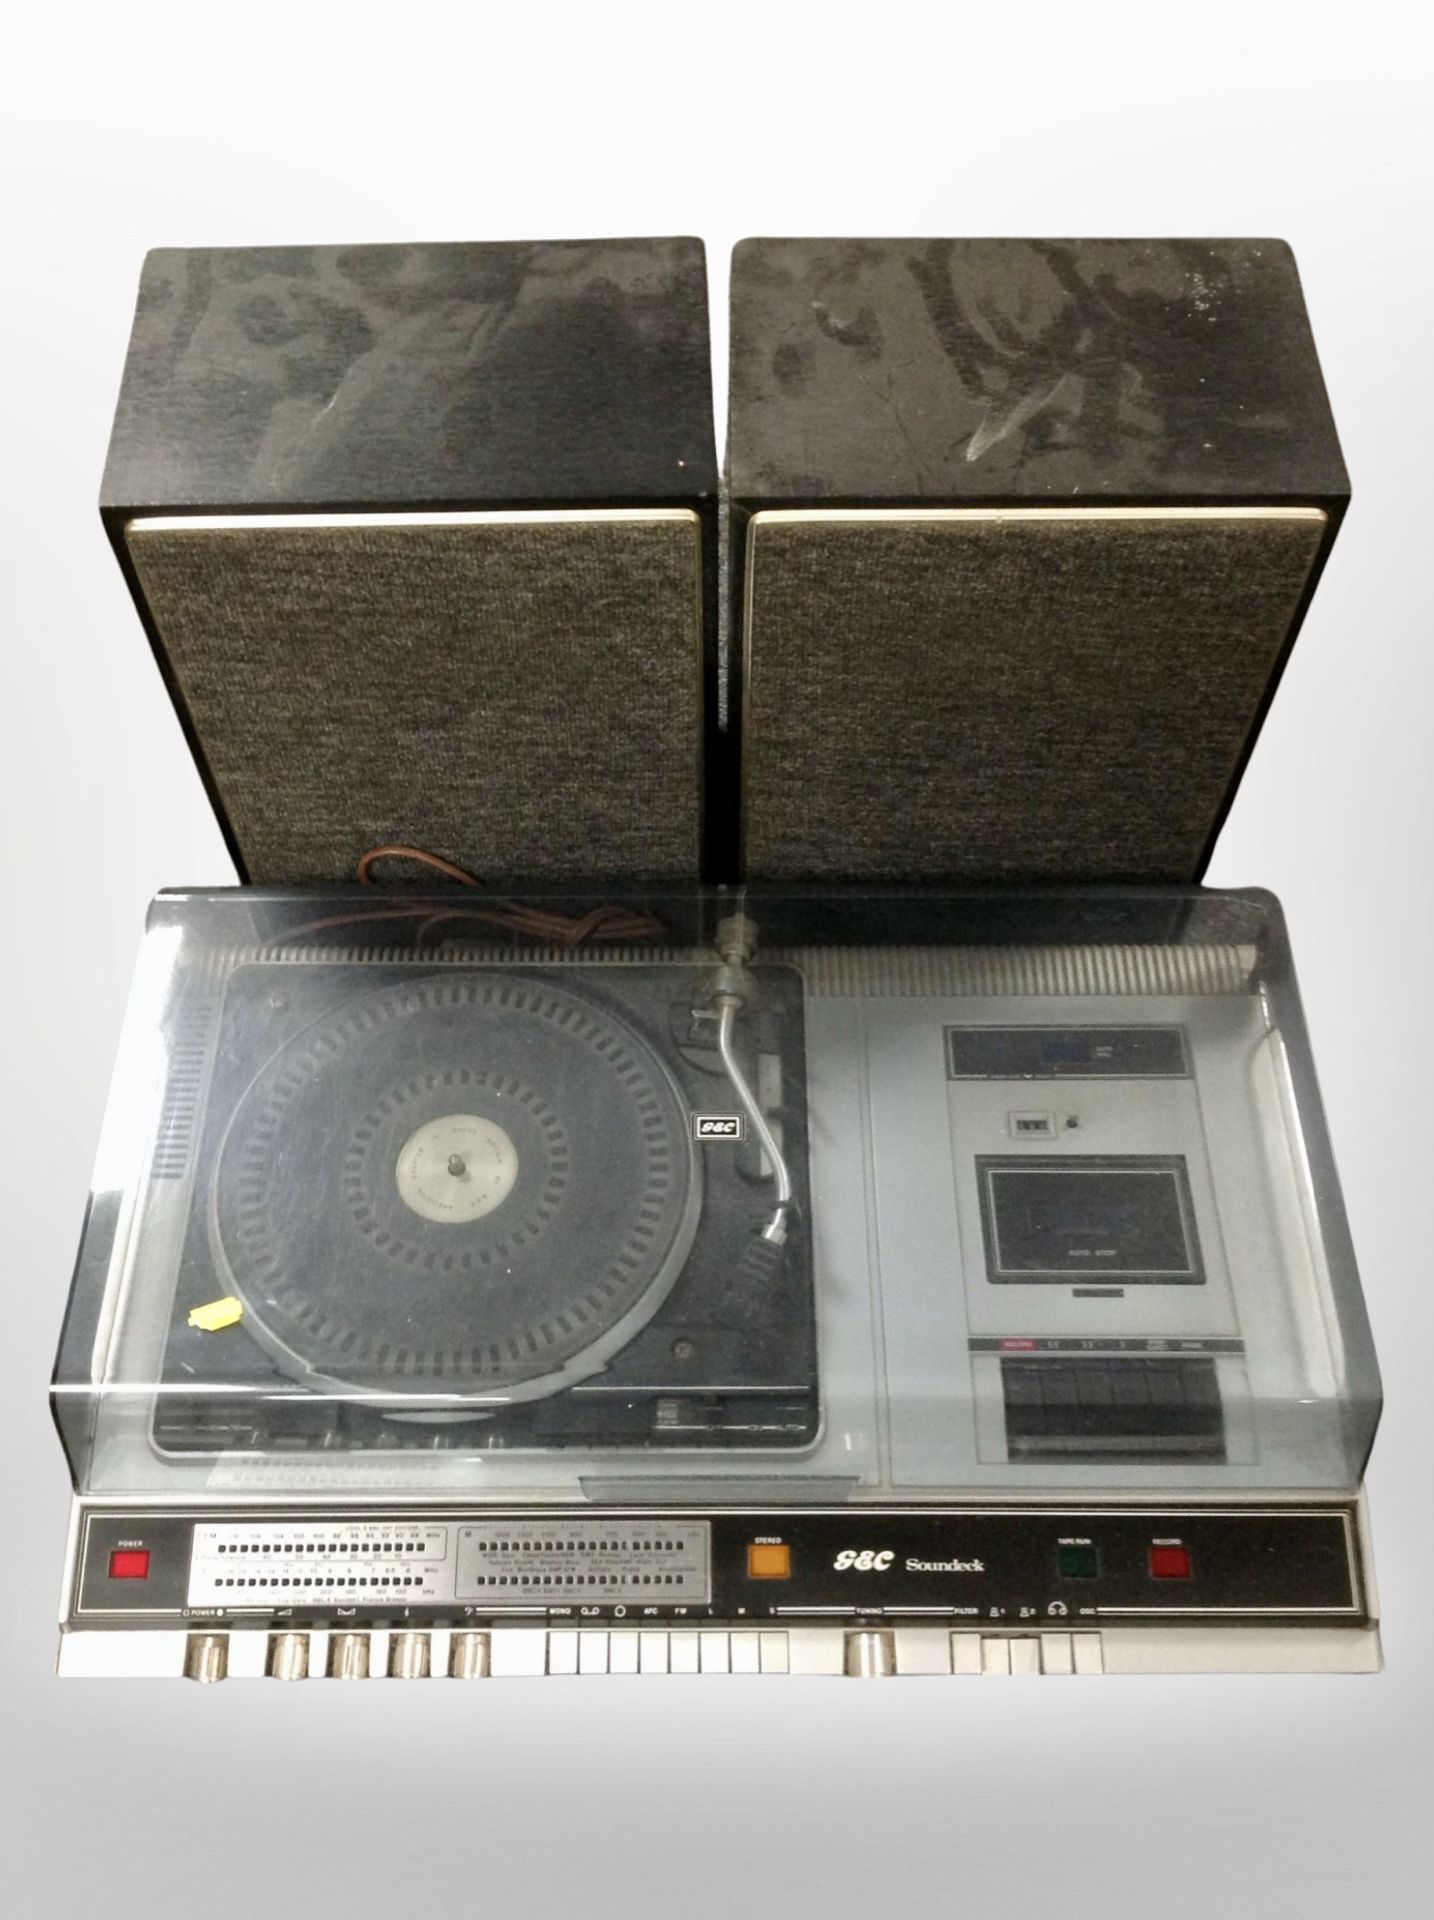 A GEC soundeck turntable and a pair of speakers.